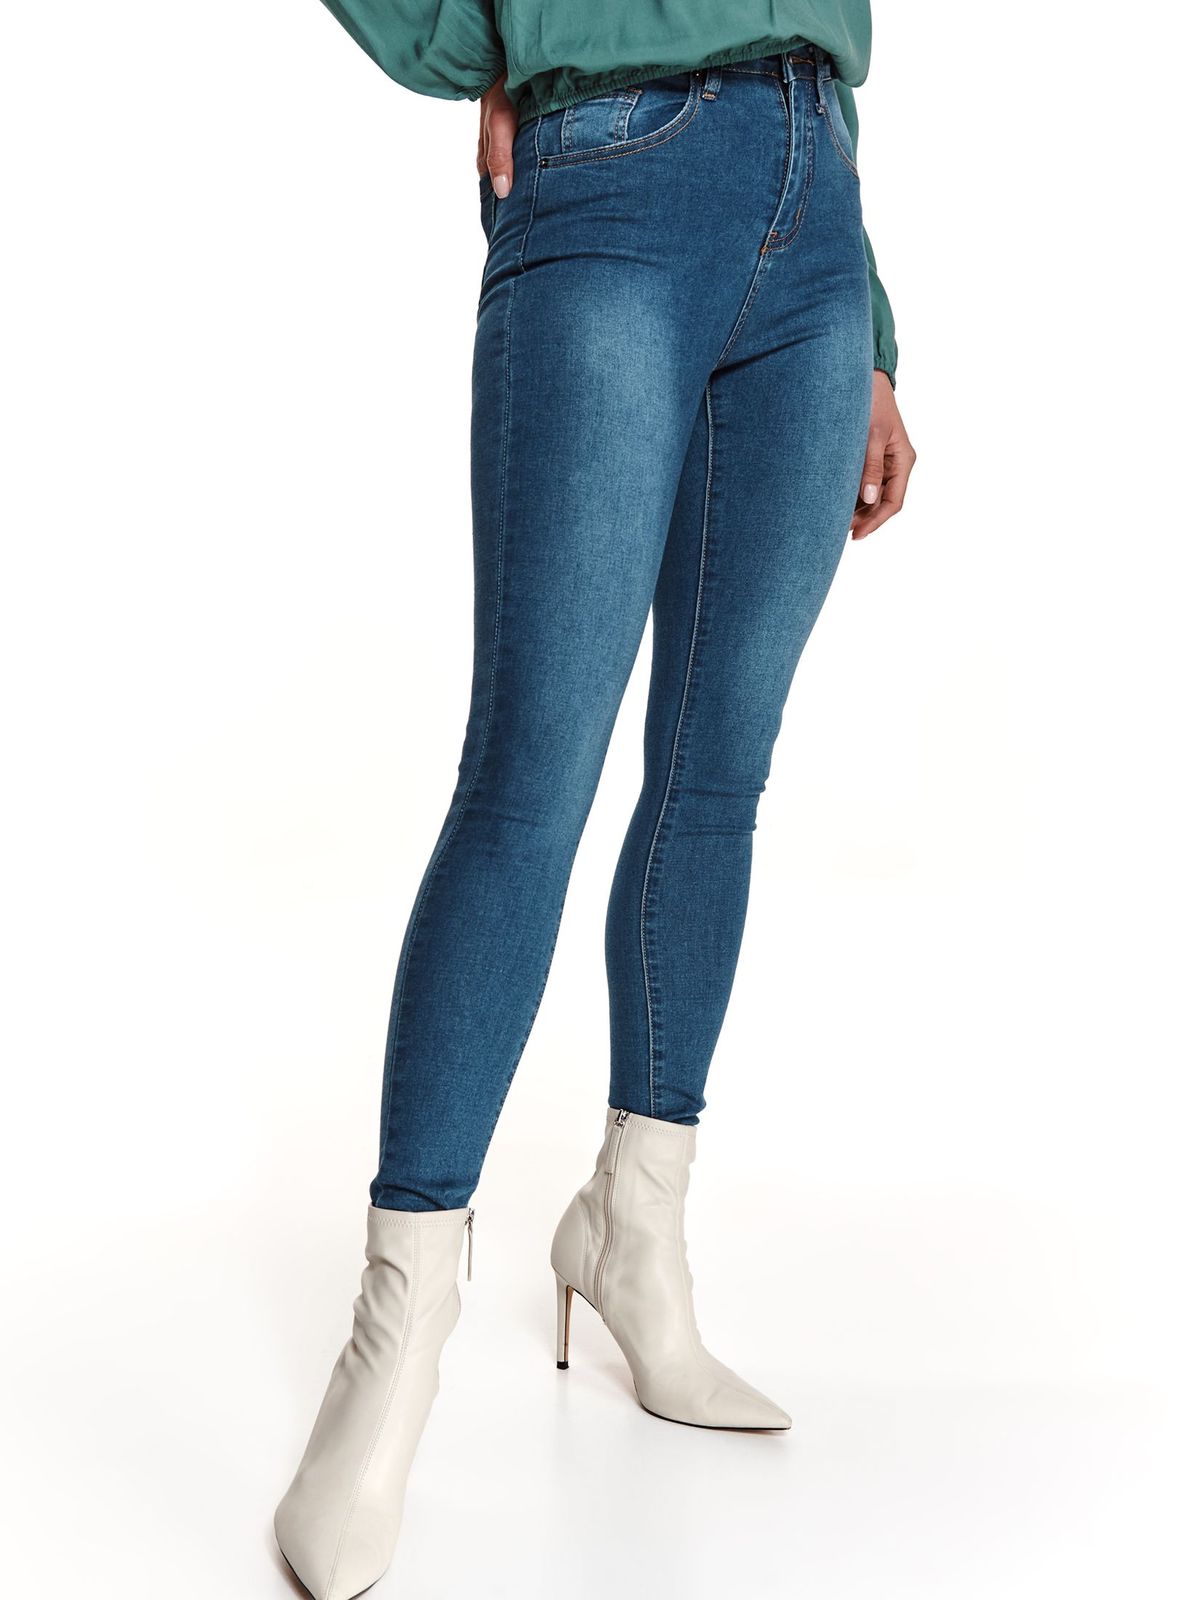 Blue trousers denim conical high waisted